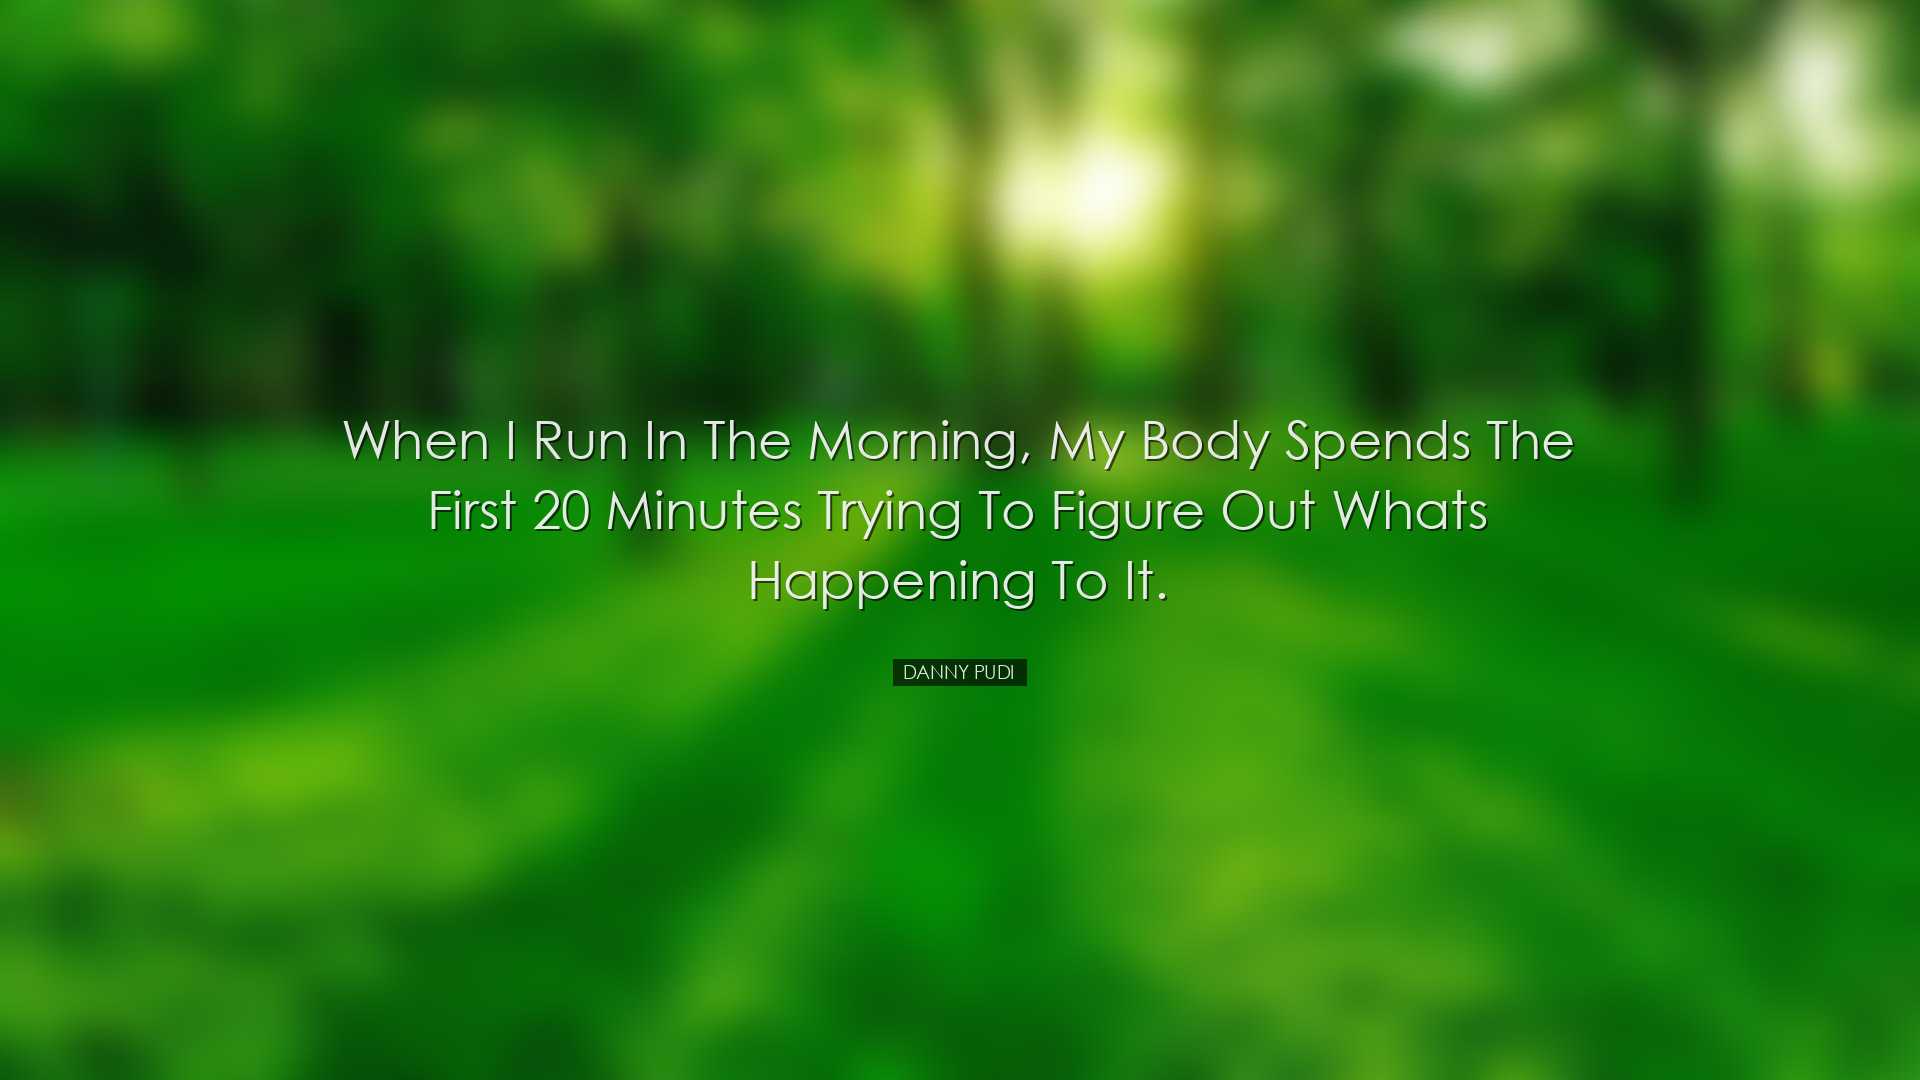 When I run in the morning, my body spends the first 20 minutes try